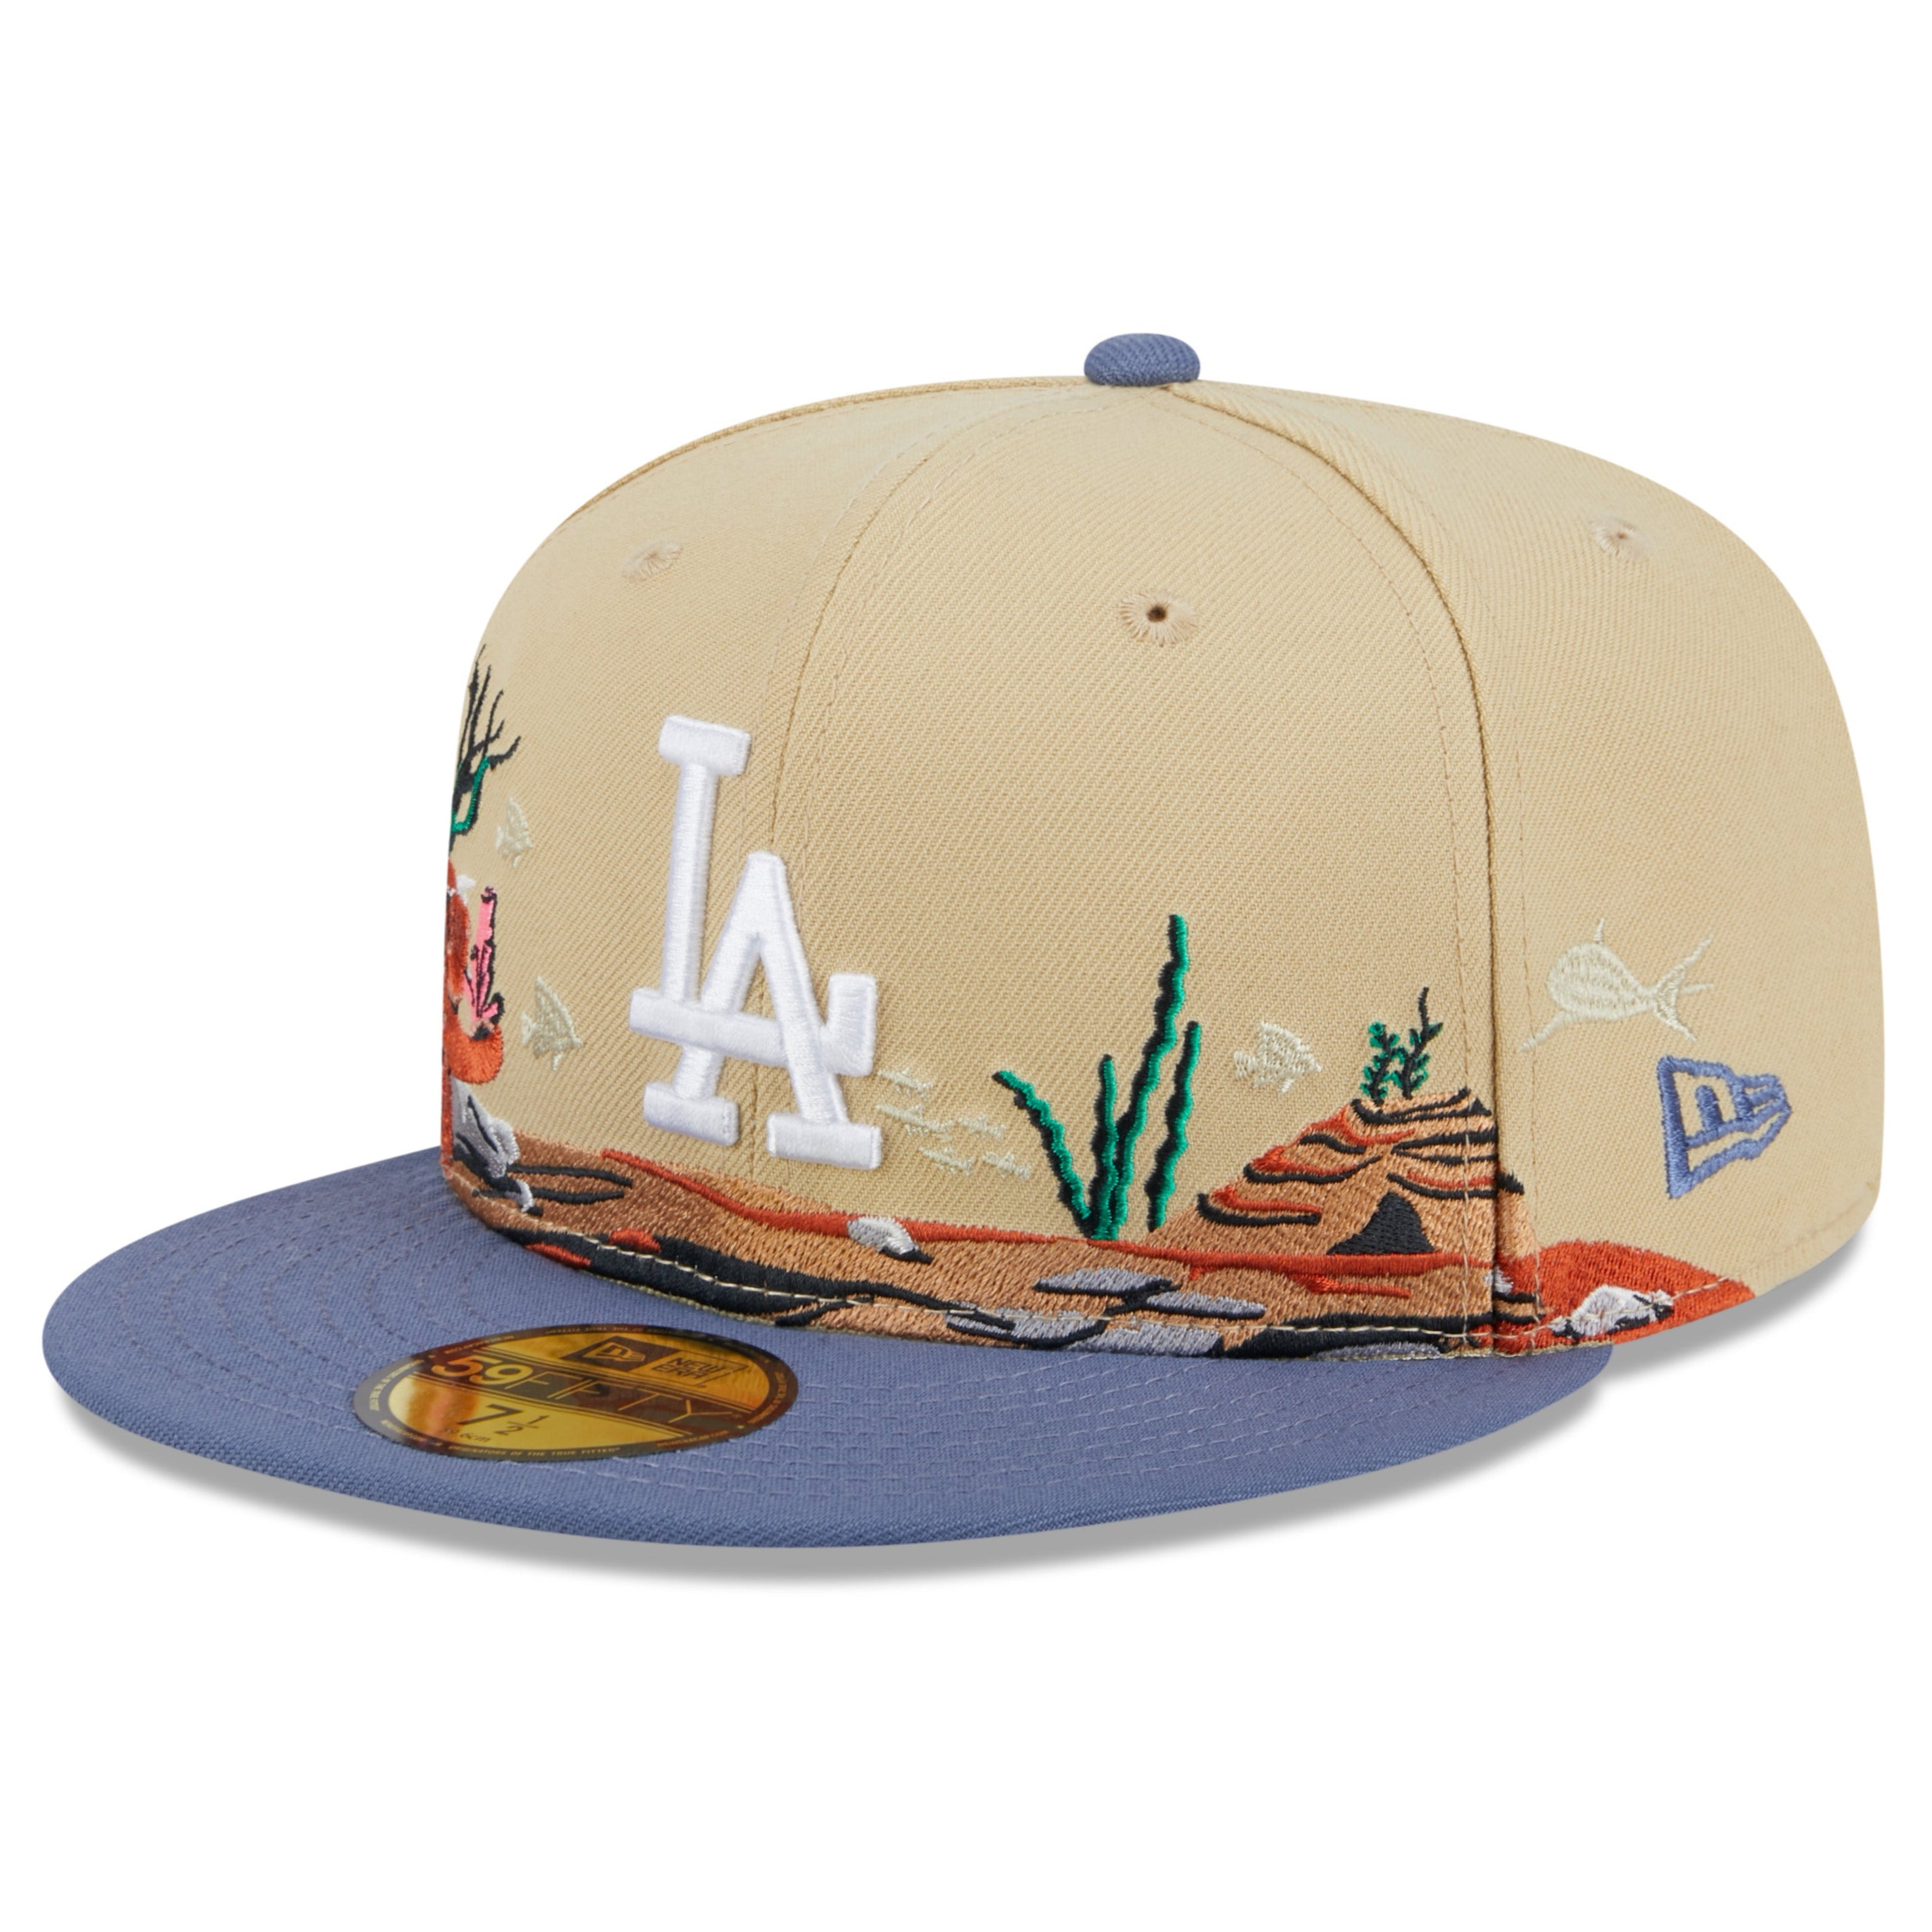 NEW ERA 59FIFTY MLB LOS ANGELES DODGERS TEAM LANDSCAPE TWO TONE / GREY UV FITTED CAP